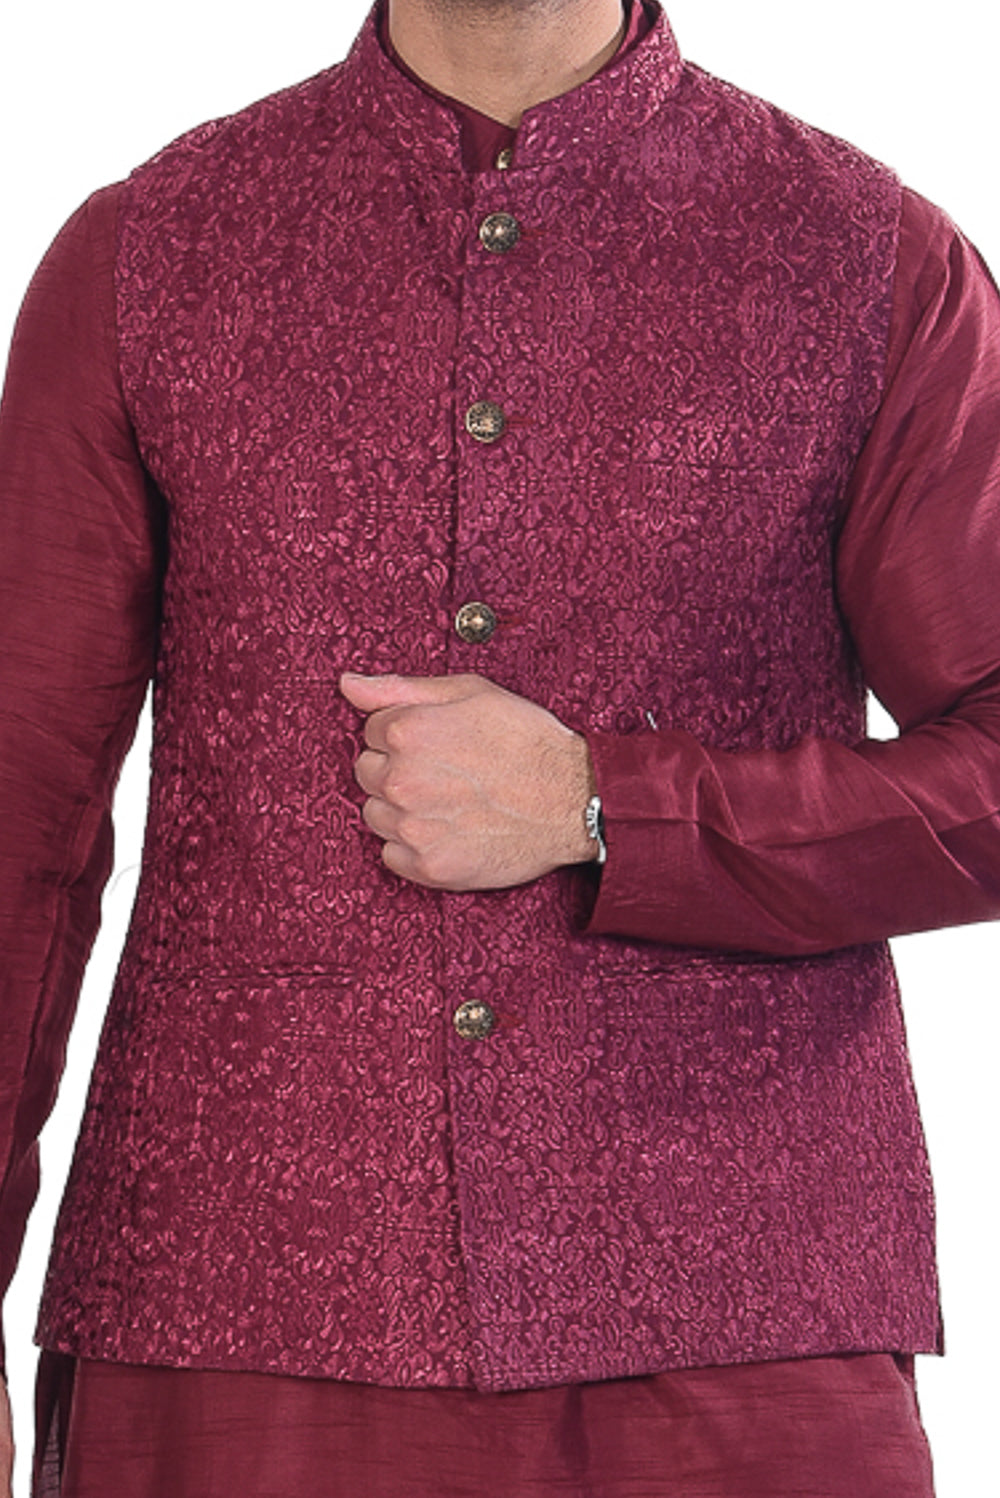 Wine Koti Jacket Set with Embroidered Motifs